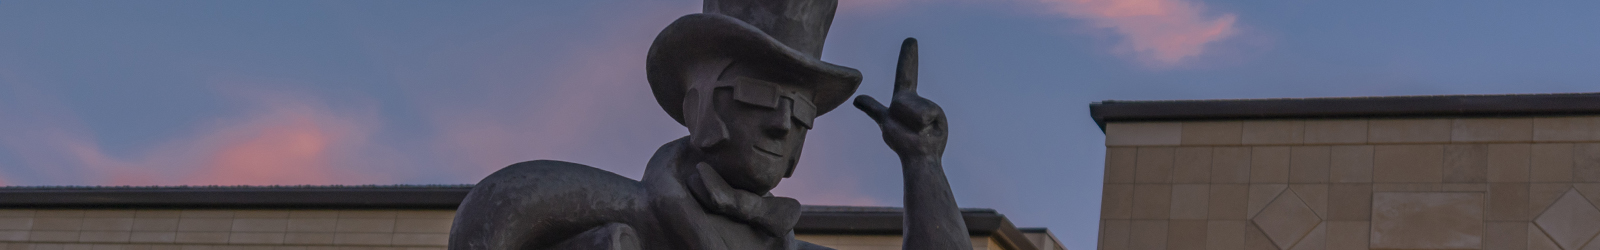 Ichabod statue and pink clouds